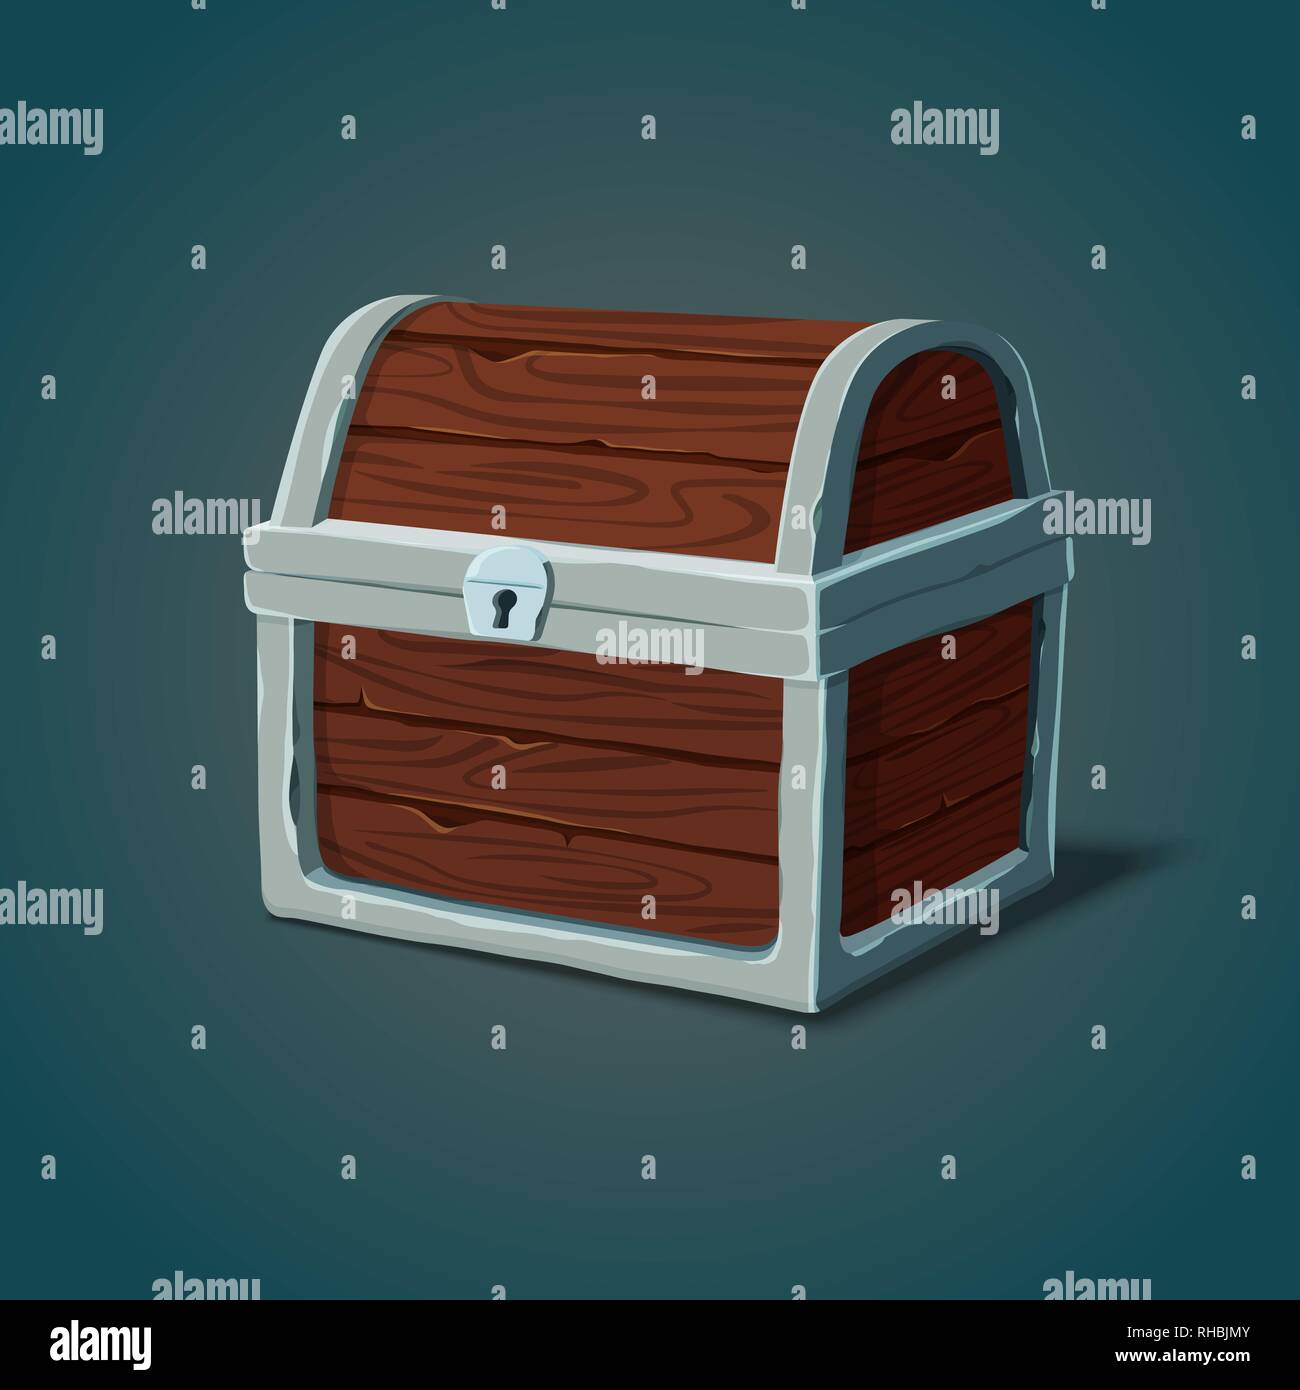 Isometric wooden dower chest Stock Vector